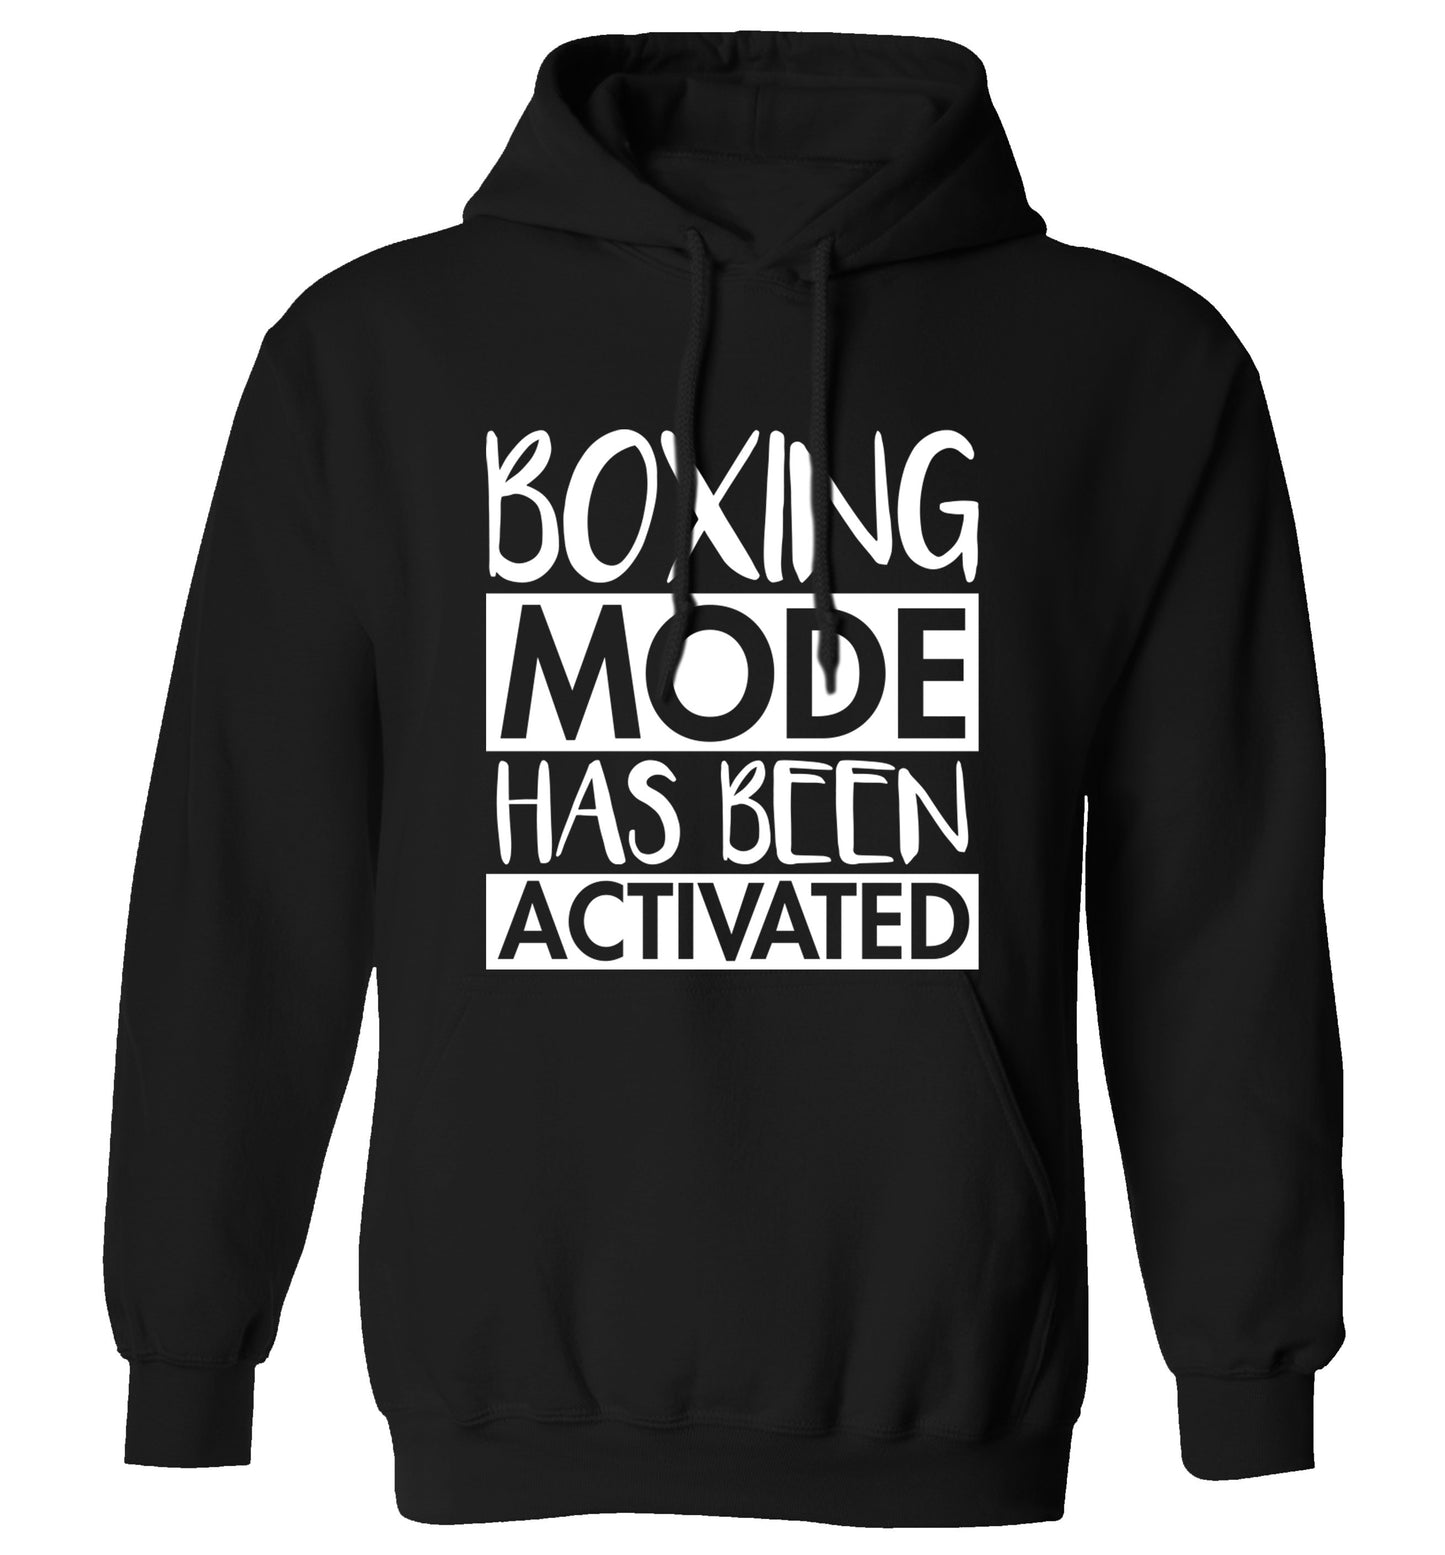 Boxing mode activated adults unisex black hoodie 2XL